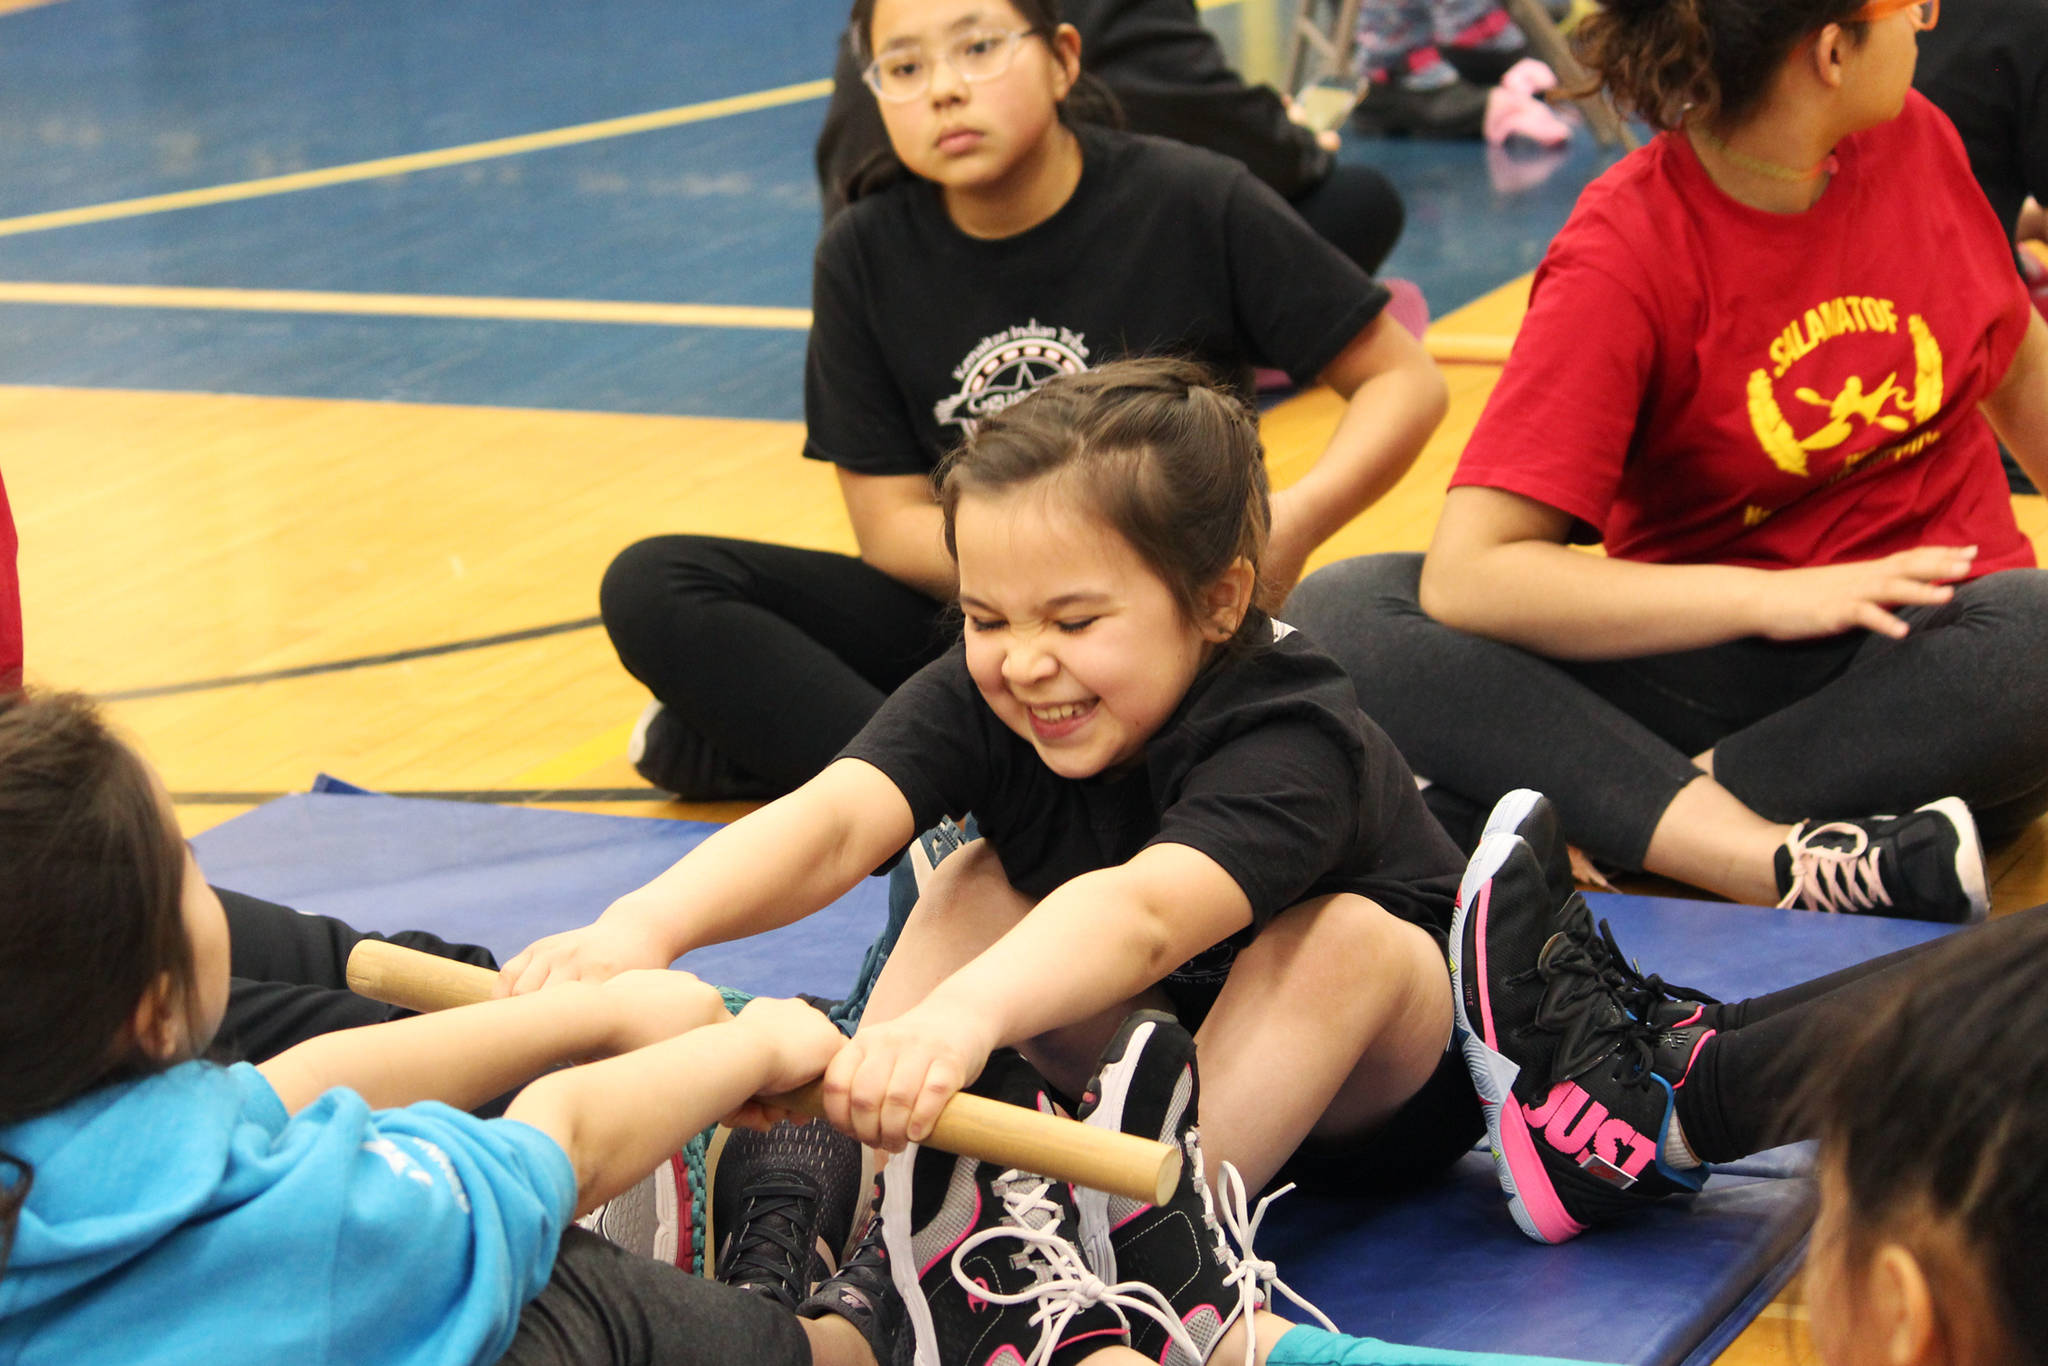 Sonya Ivanoff, 8, participates in the Eskimo Stick Pull during the Kachemak Bay Traditional Games invitational Saturday, March 30, 2019 at Homer High School in Homer, Alaska. (Photo by Megan Pacer/Homer News)